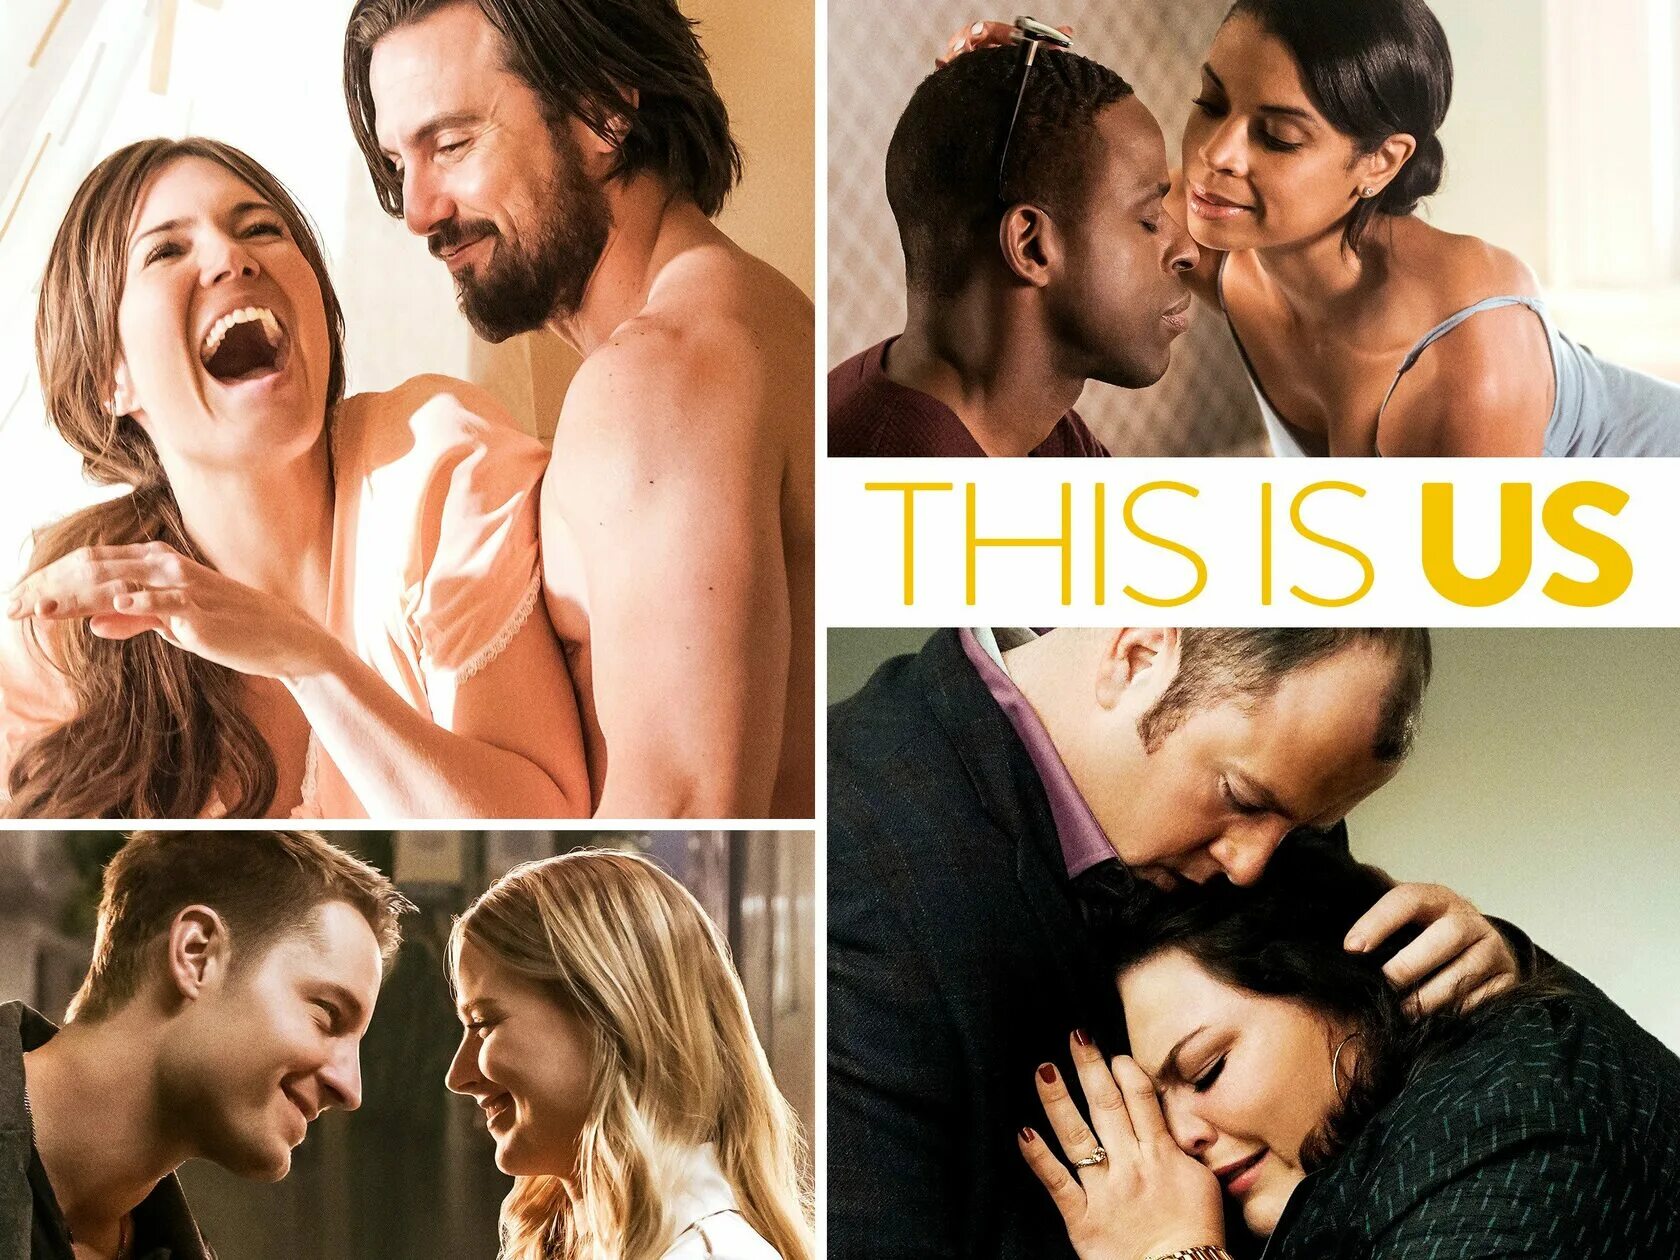 This is us review. This is us.